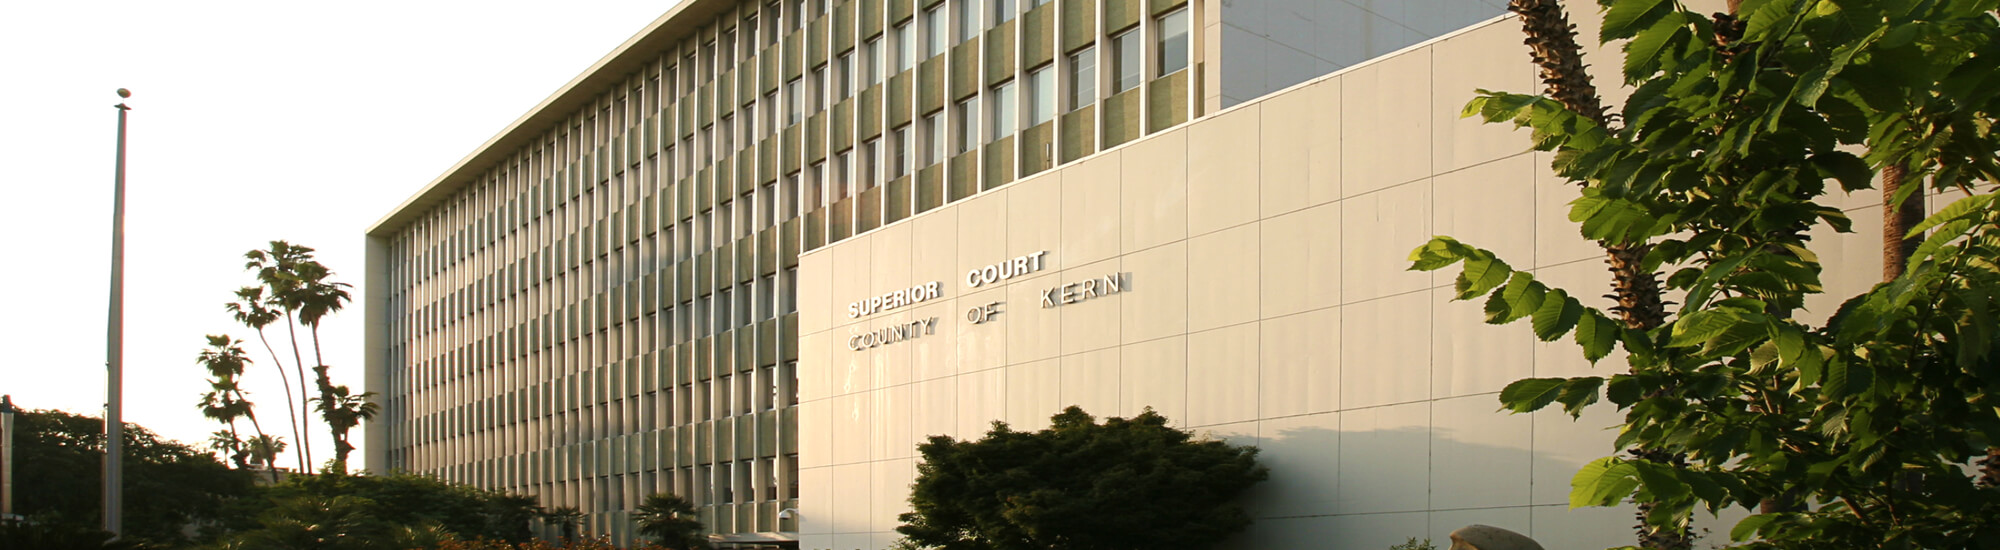 kern county court house